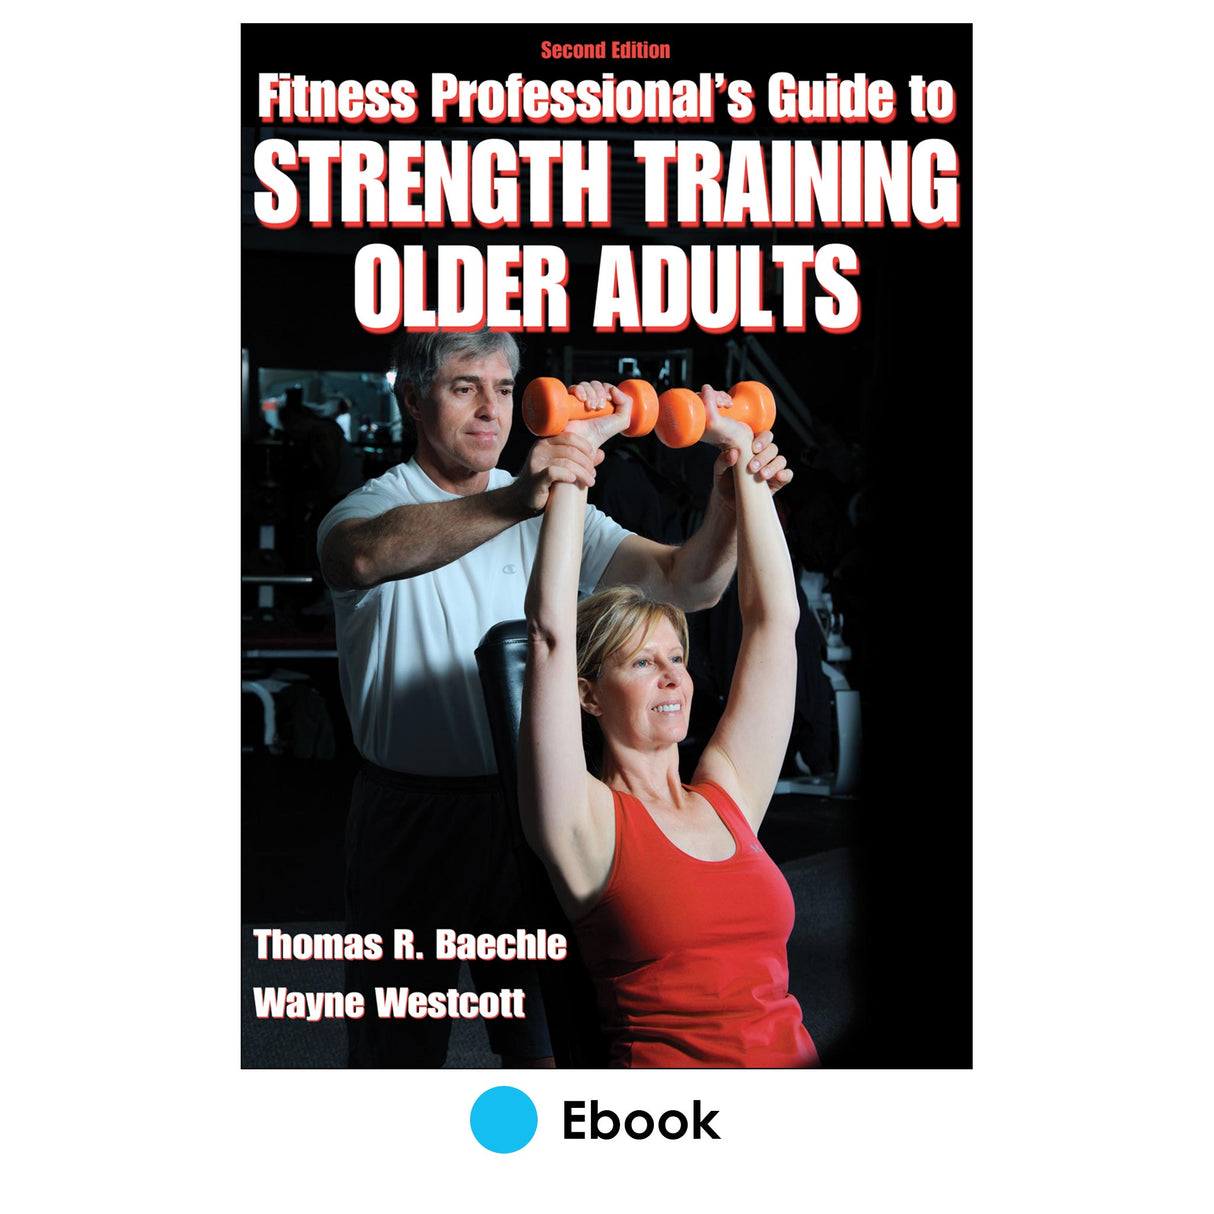 Fitness Professional's Guide to Strength Training Older Adults 2nd Edition PDF